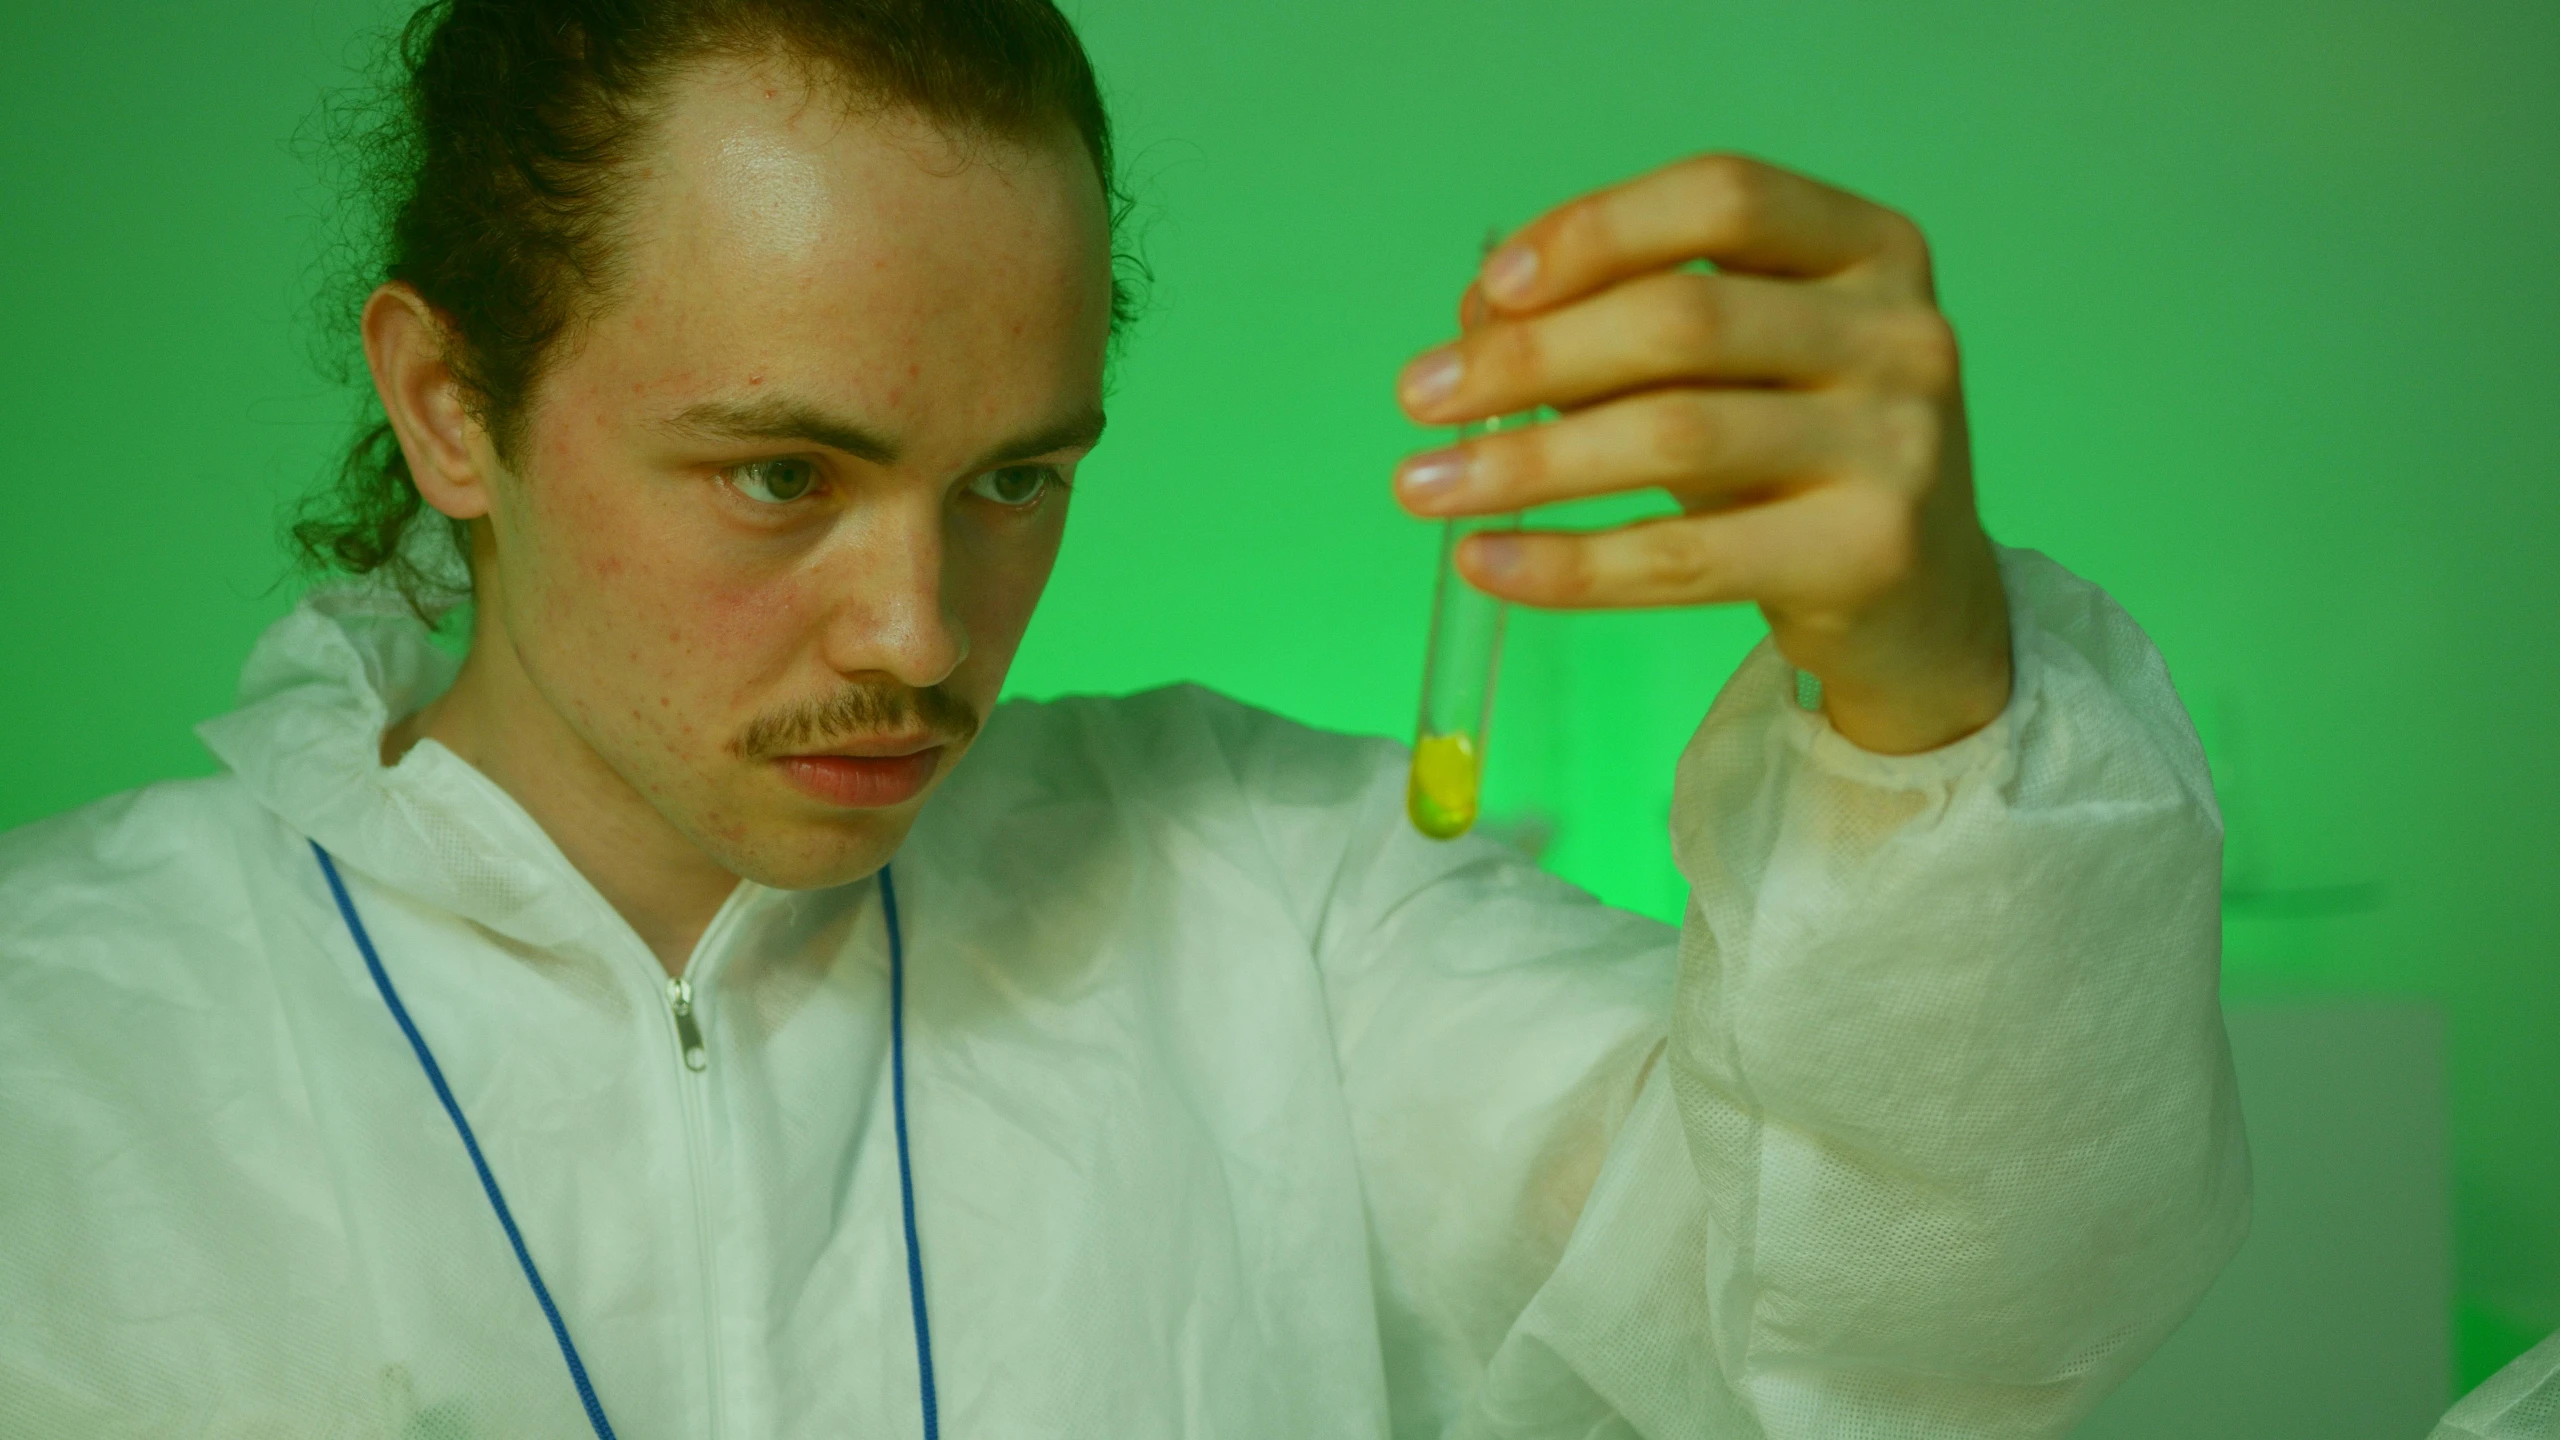 a man in a lab coat holding a test tube, an album cover, by Attila Meszlenyi, green saliva, concentrated, chemical woekshop, frank dillane